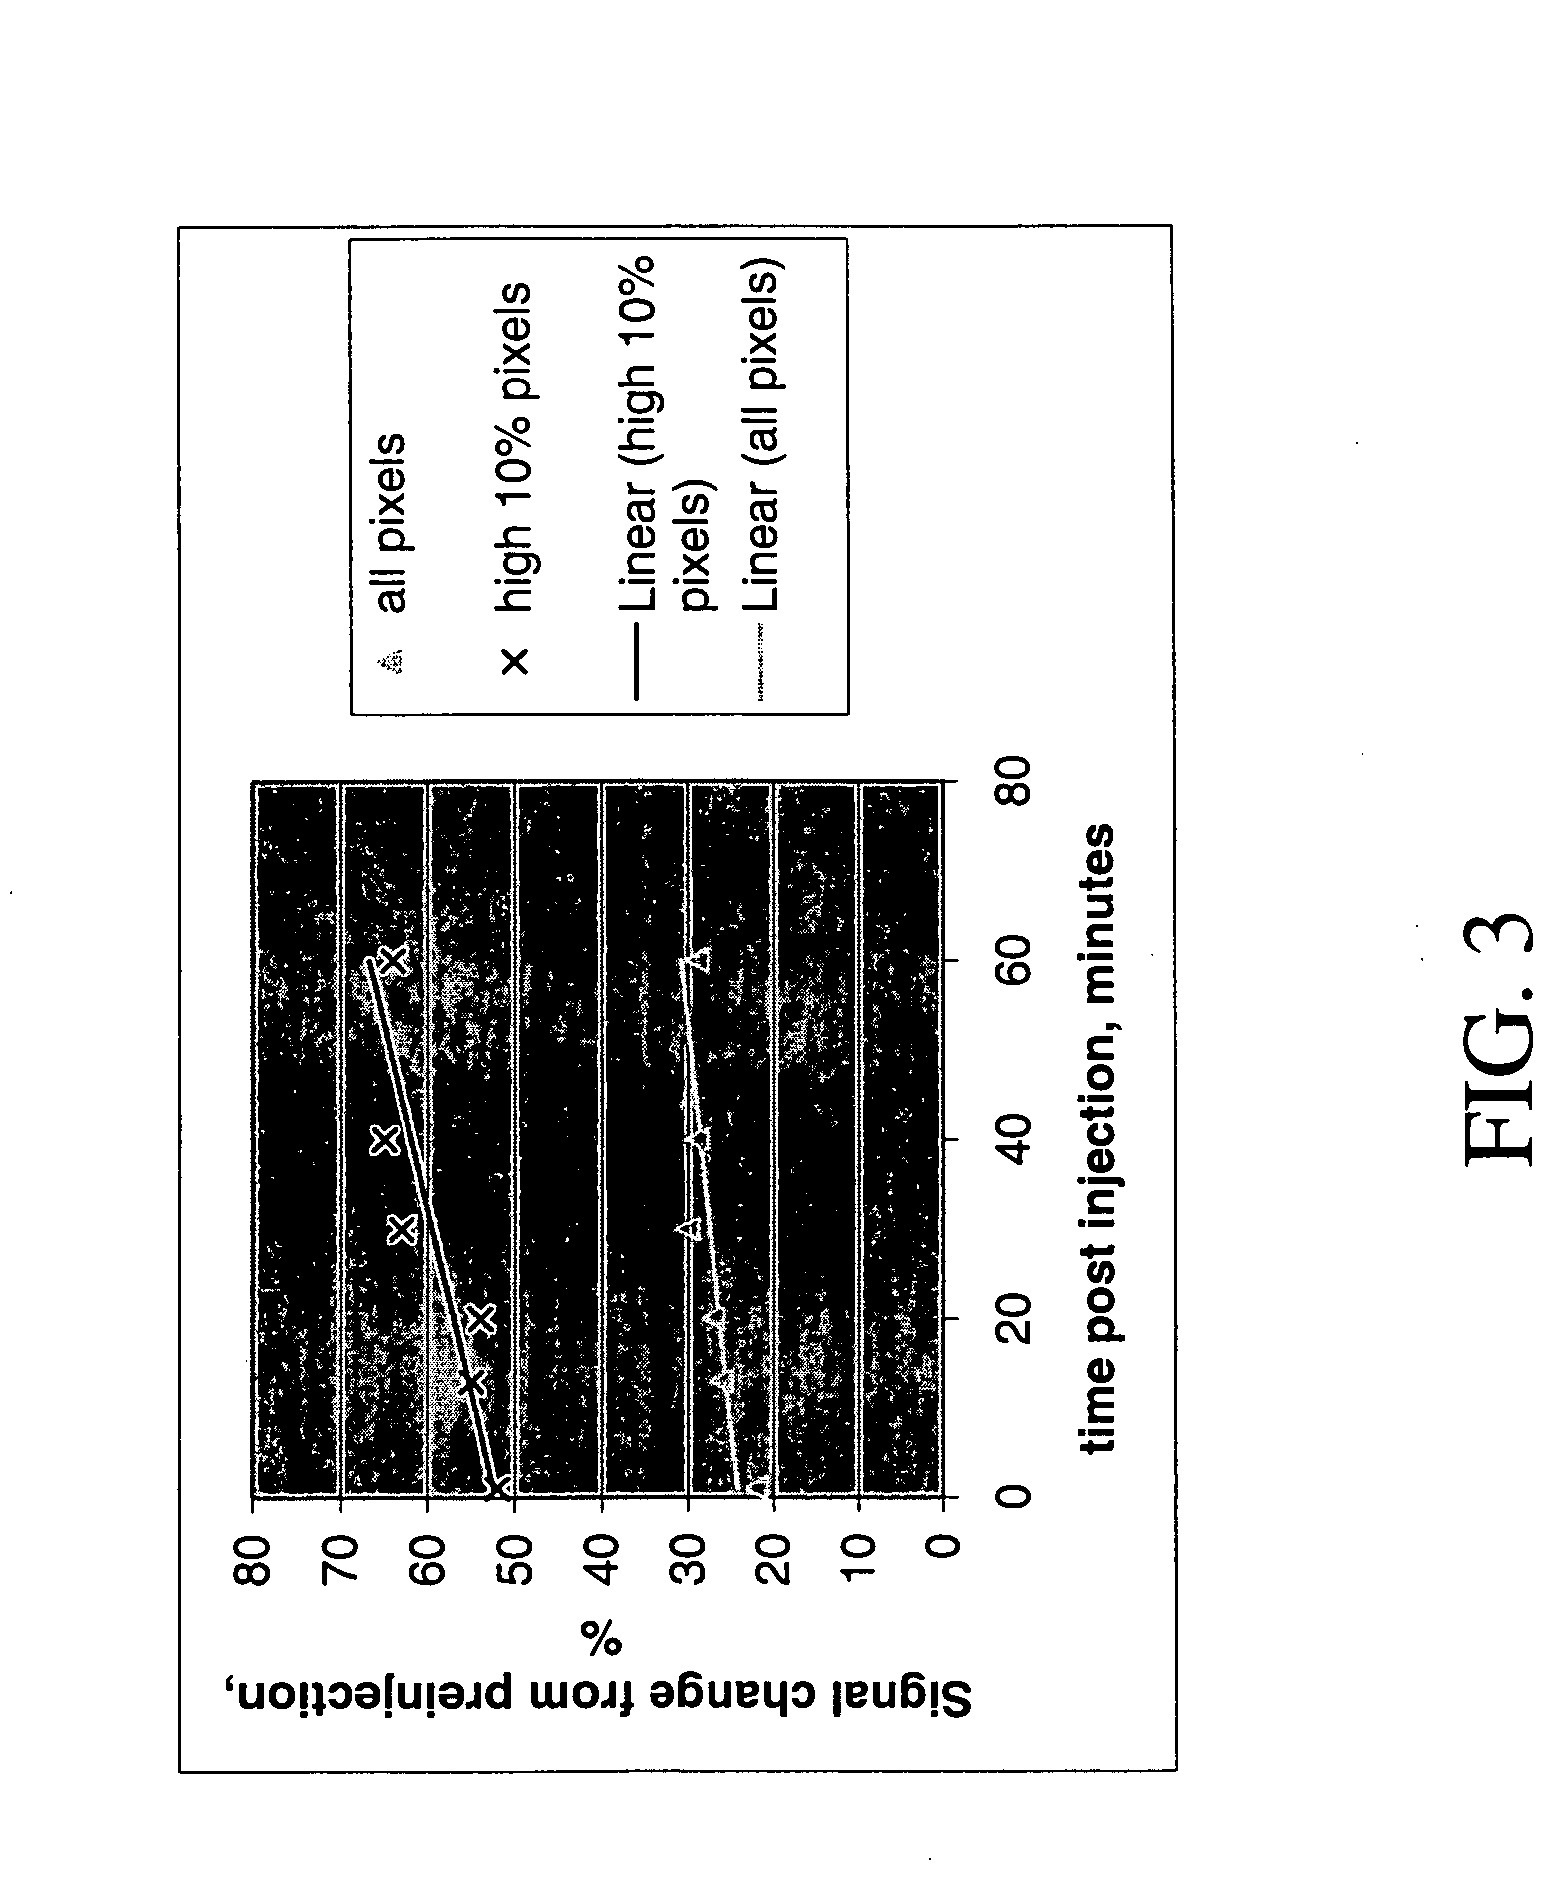 Polymeric contrast agents for use in medical imaging